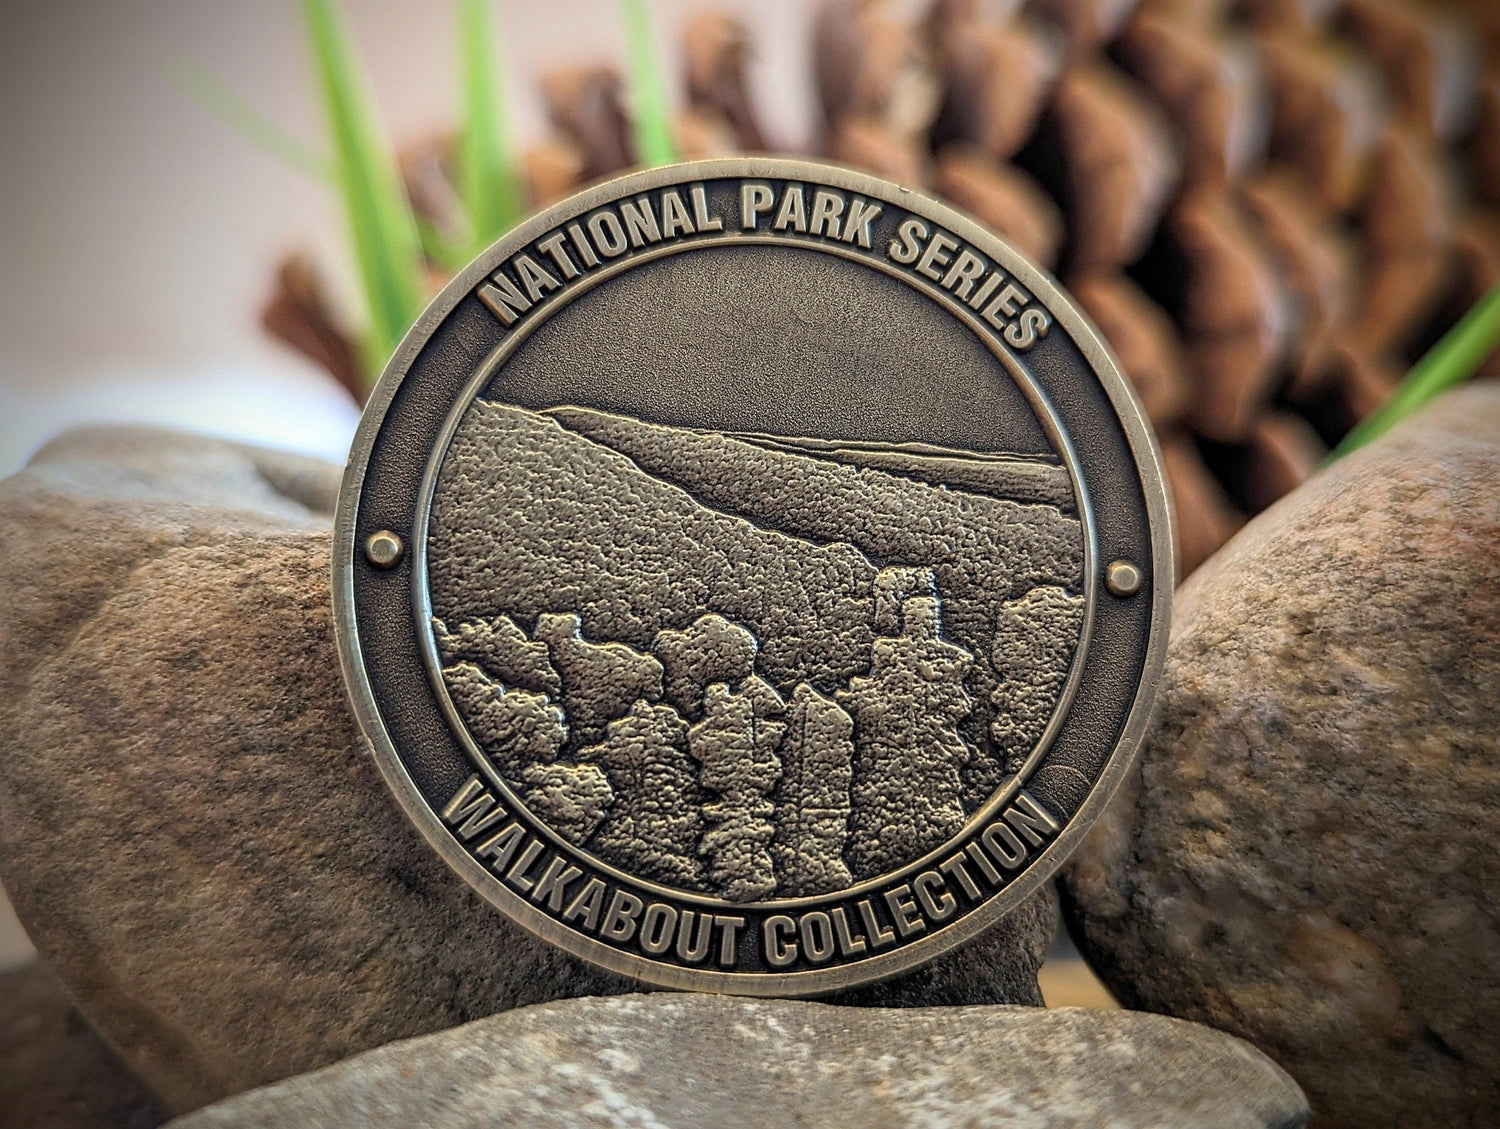 HOT SPRINGS NATIONAL PARK CHALLENGE COIN